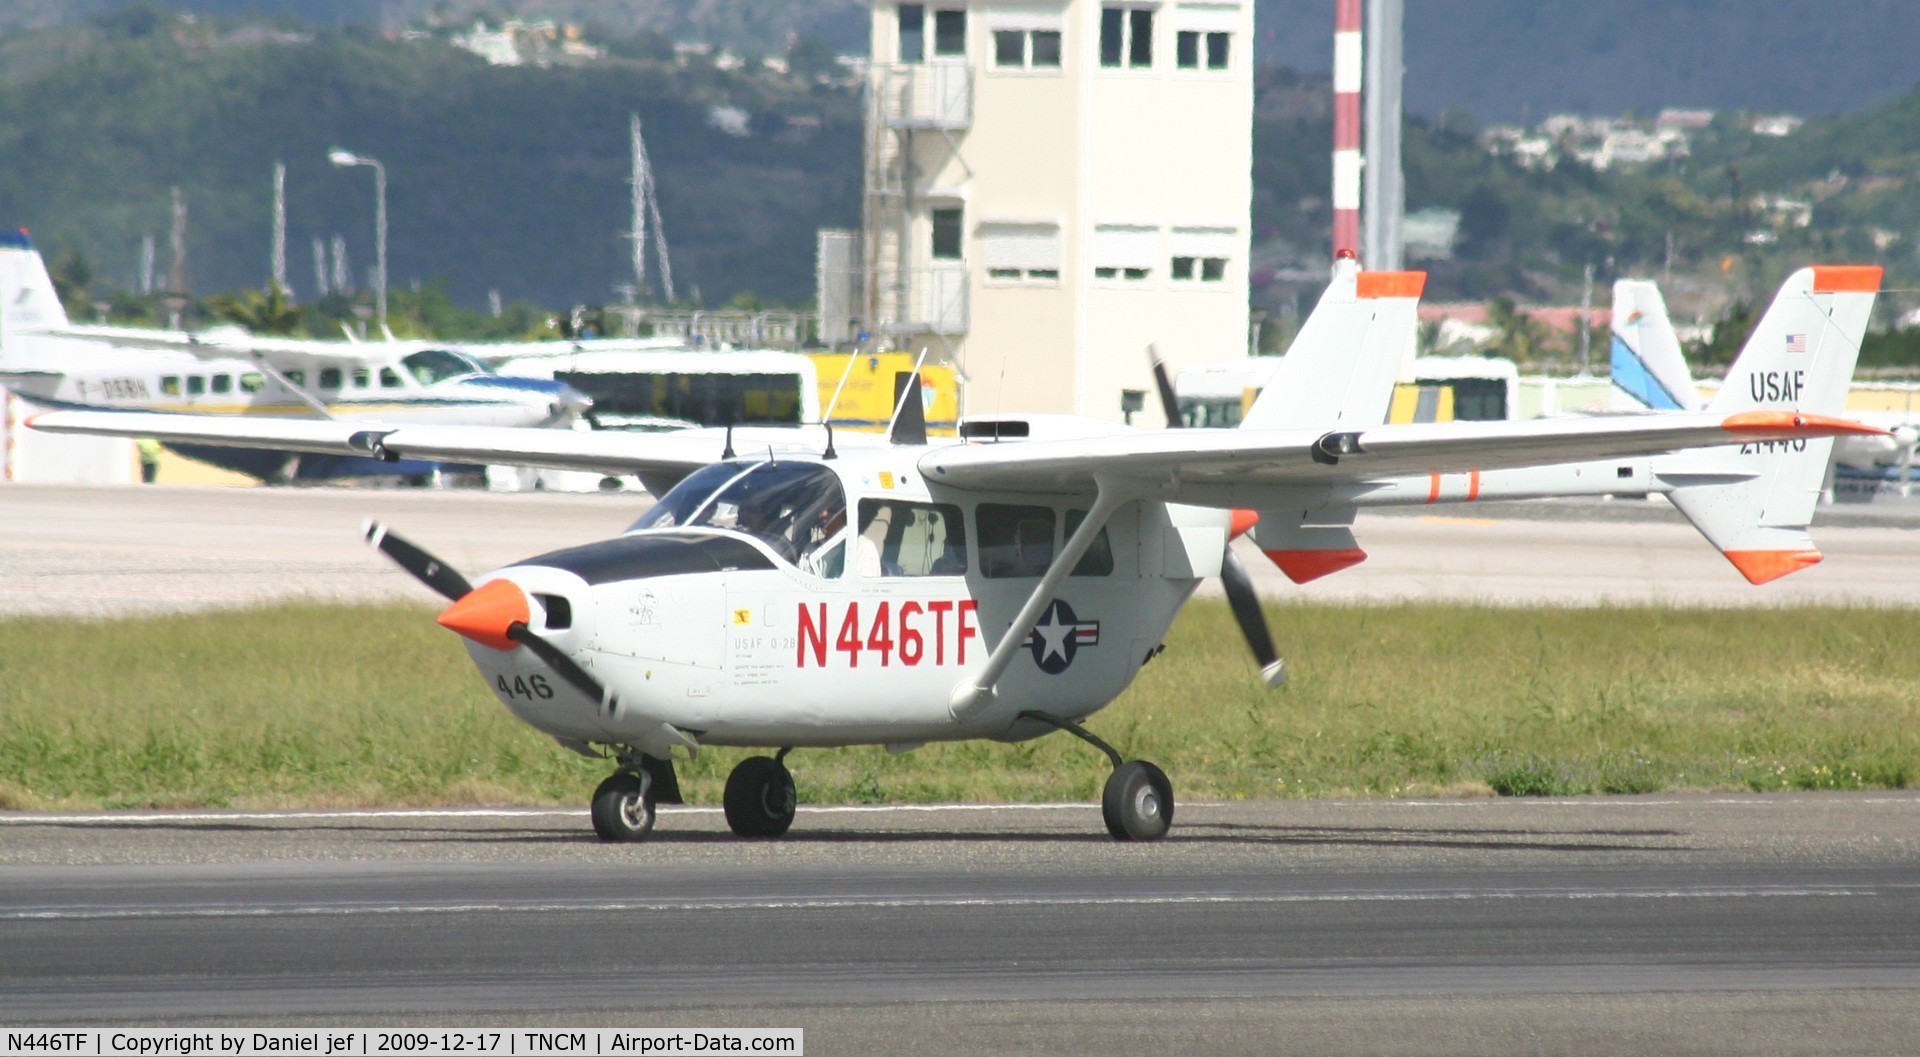 N446TF, Cessna 337A Super Skymaster C/N 337-0454, N446TF back tracking runway 10 for to the taxi way Bravo befor take off